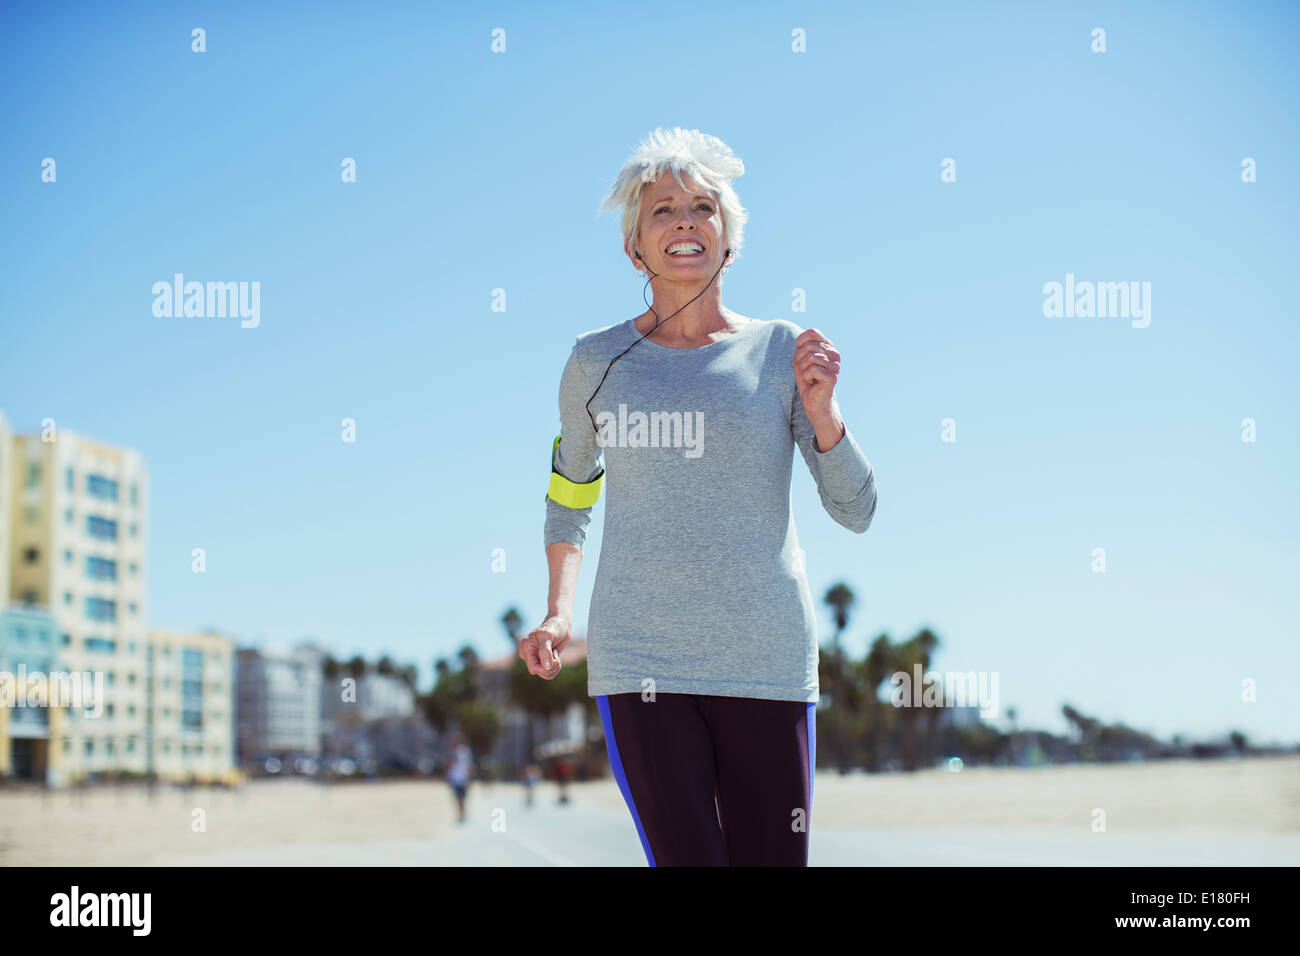 Senior woman power walking on beach Banque D'Images